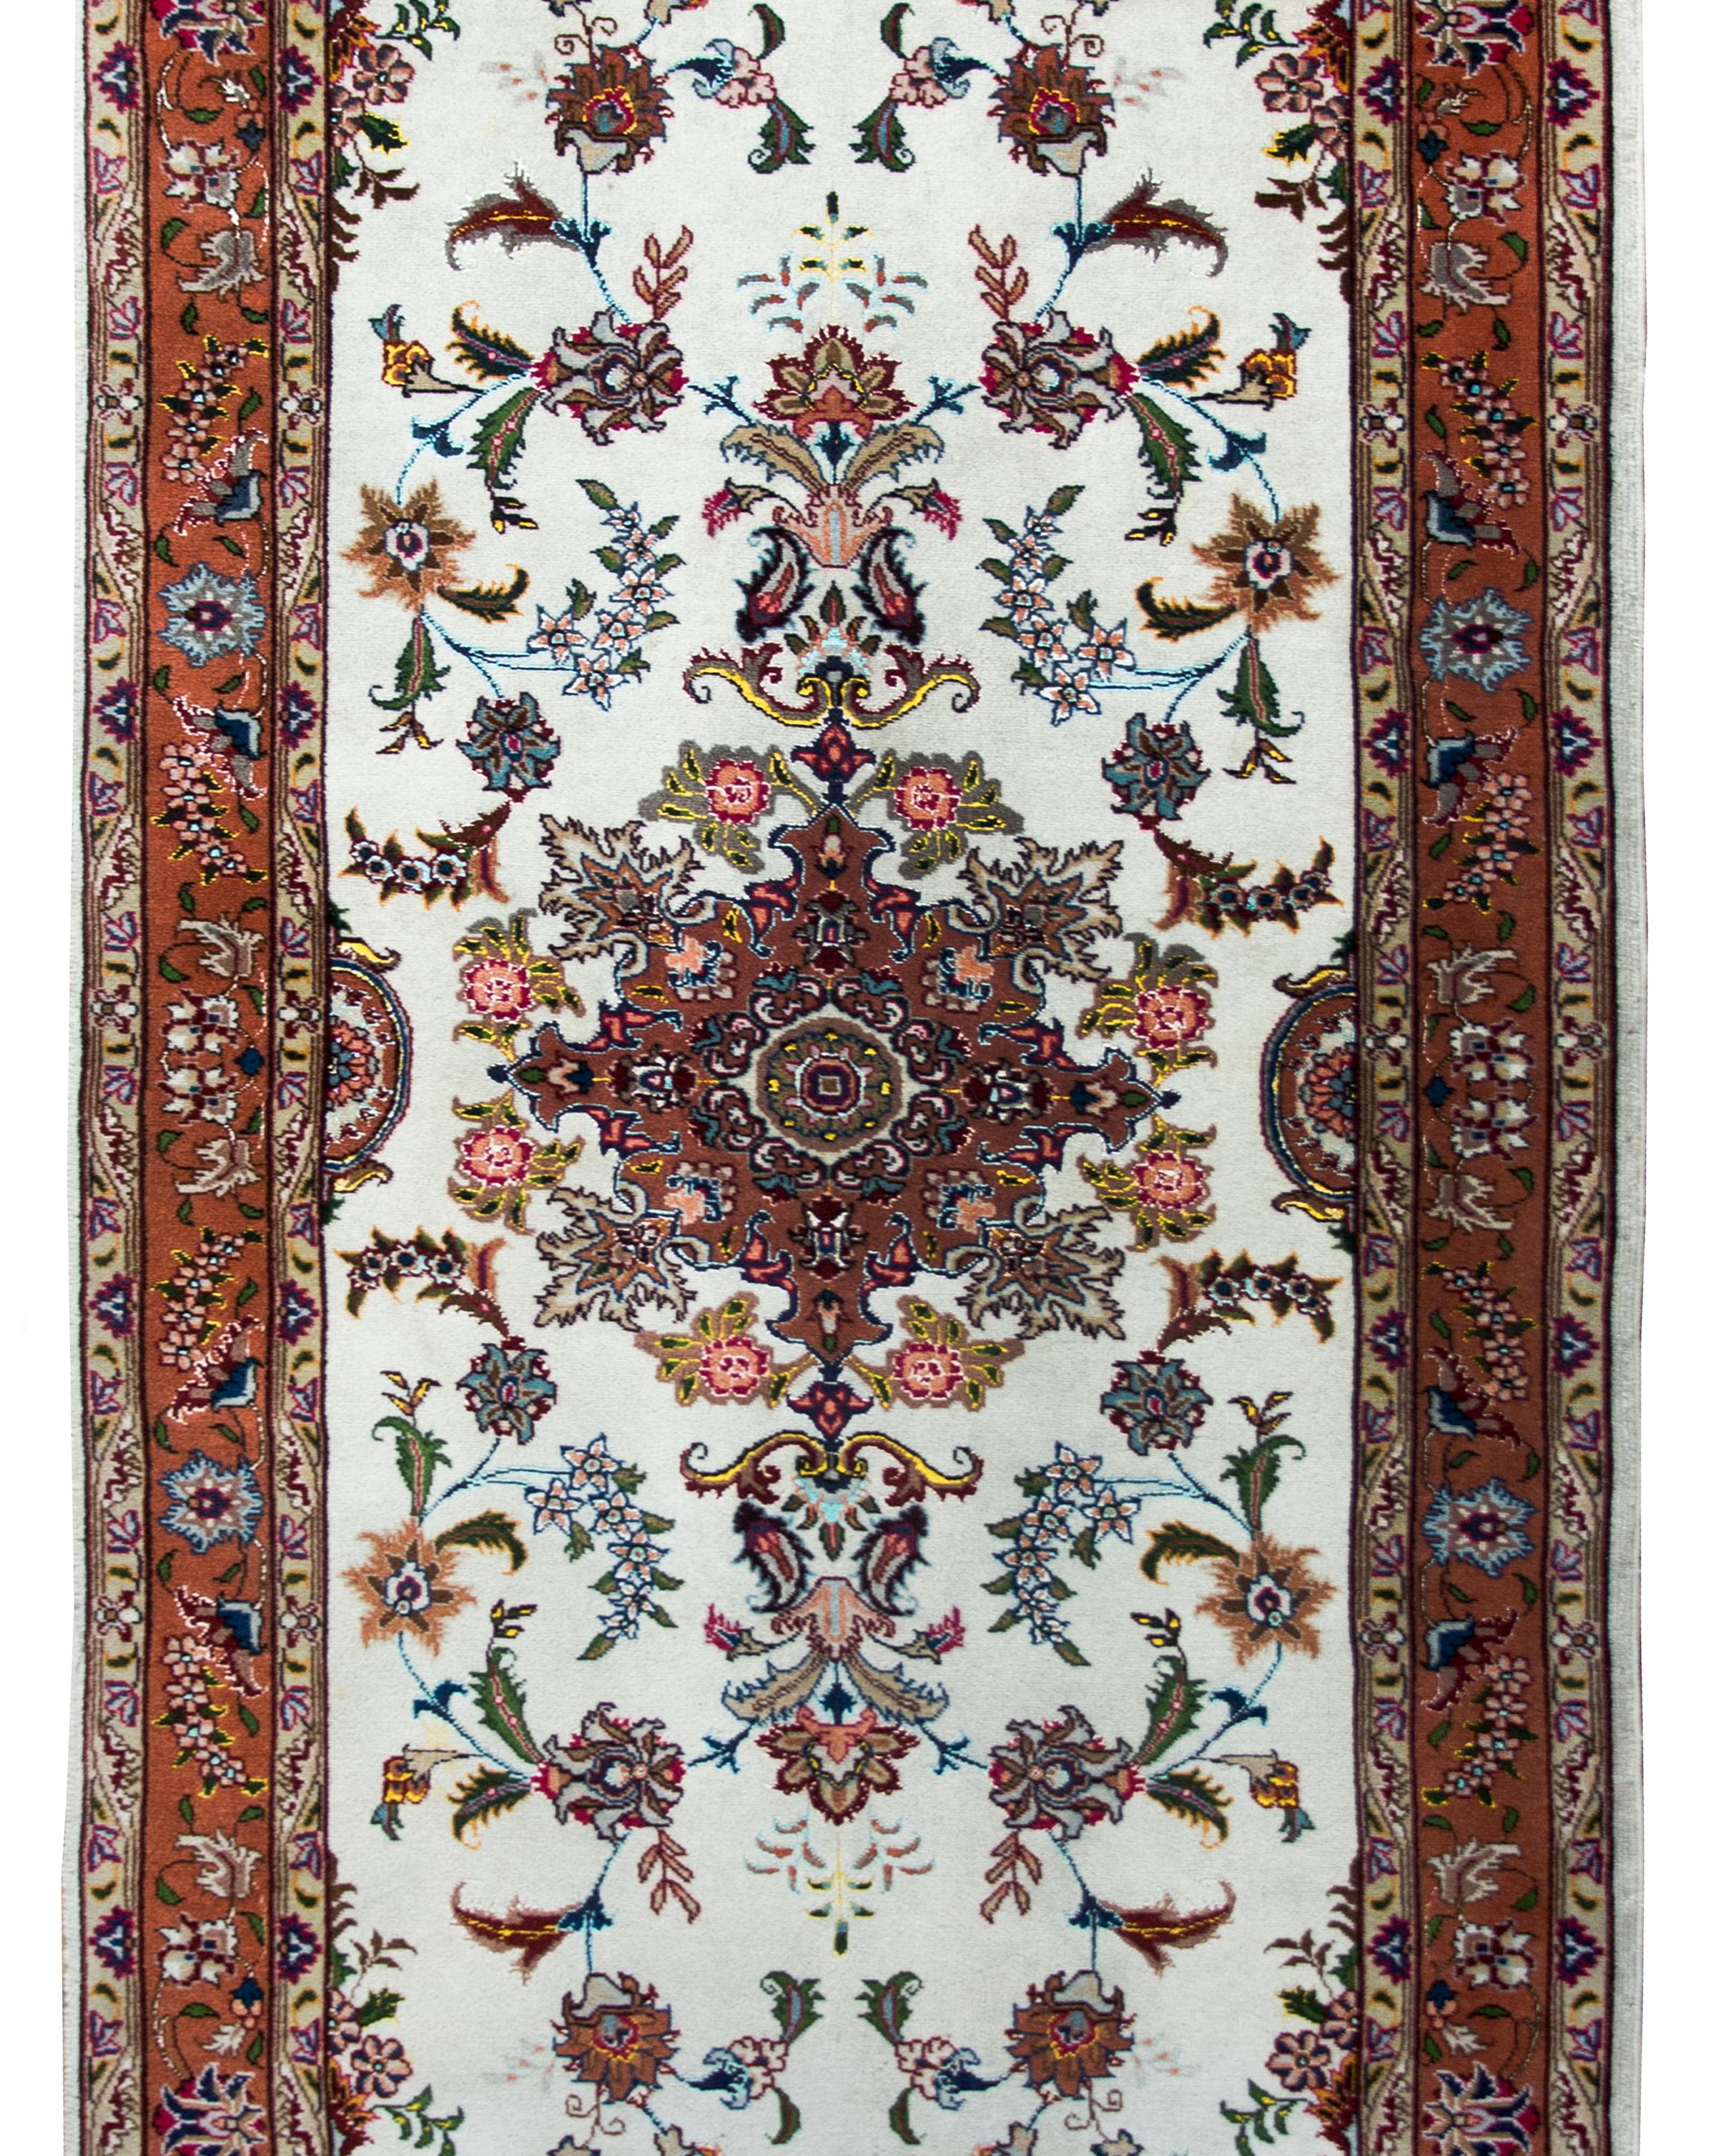 A wonderful vintage, late 20th century, Persian Tabriz rug woven in silk and wool, and with a large central floral medallion living amidst a field of more flowers and vines, and surrounded by a wide complex border with even more repeated flowers and